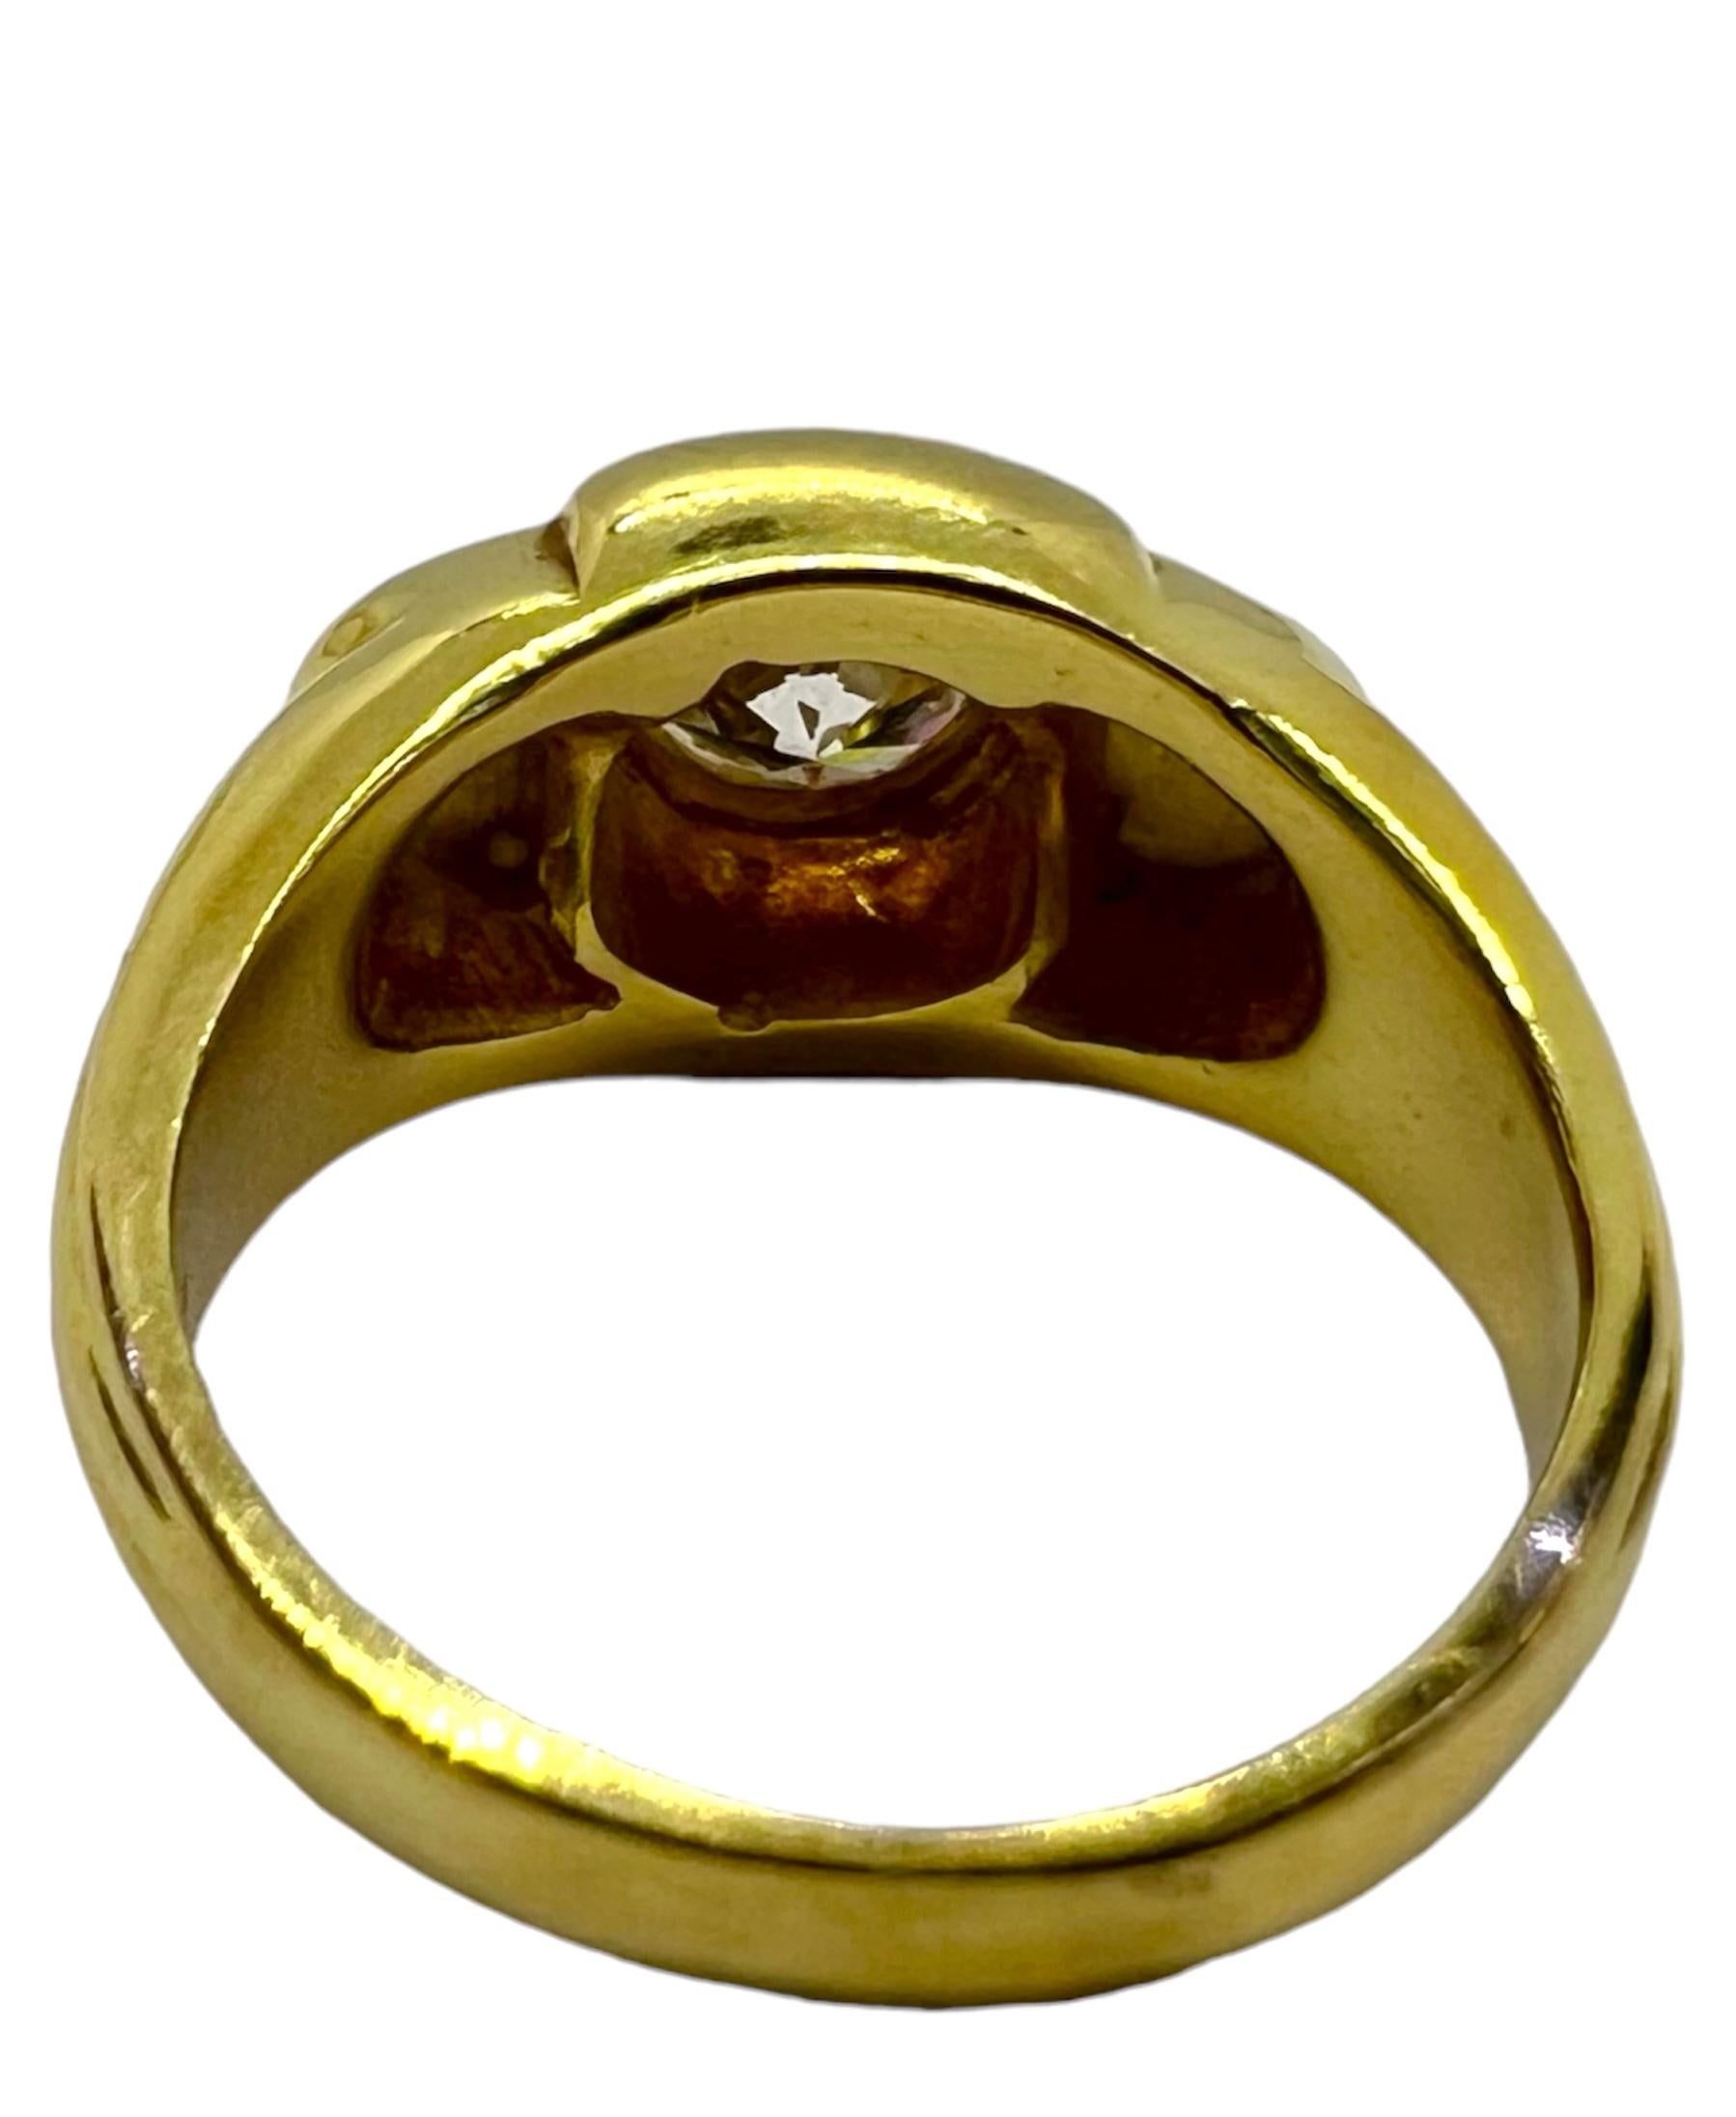 18K yellow gold ring with round diamond.

Sophia D by Joseph Dardashti LTD has been known worldwide for 35 years and are inspired by classic Art Deco design that merges with modern manufacturing techniques.  